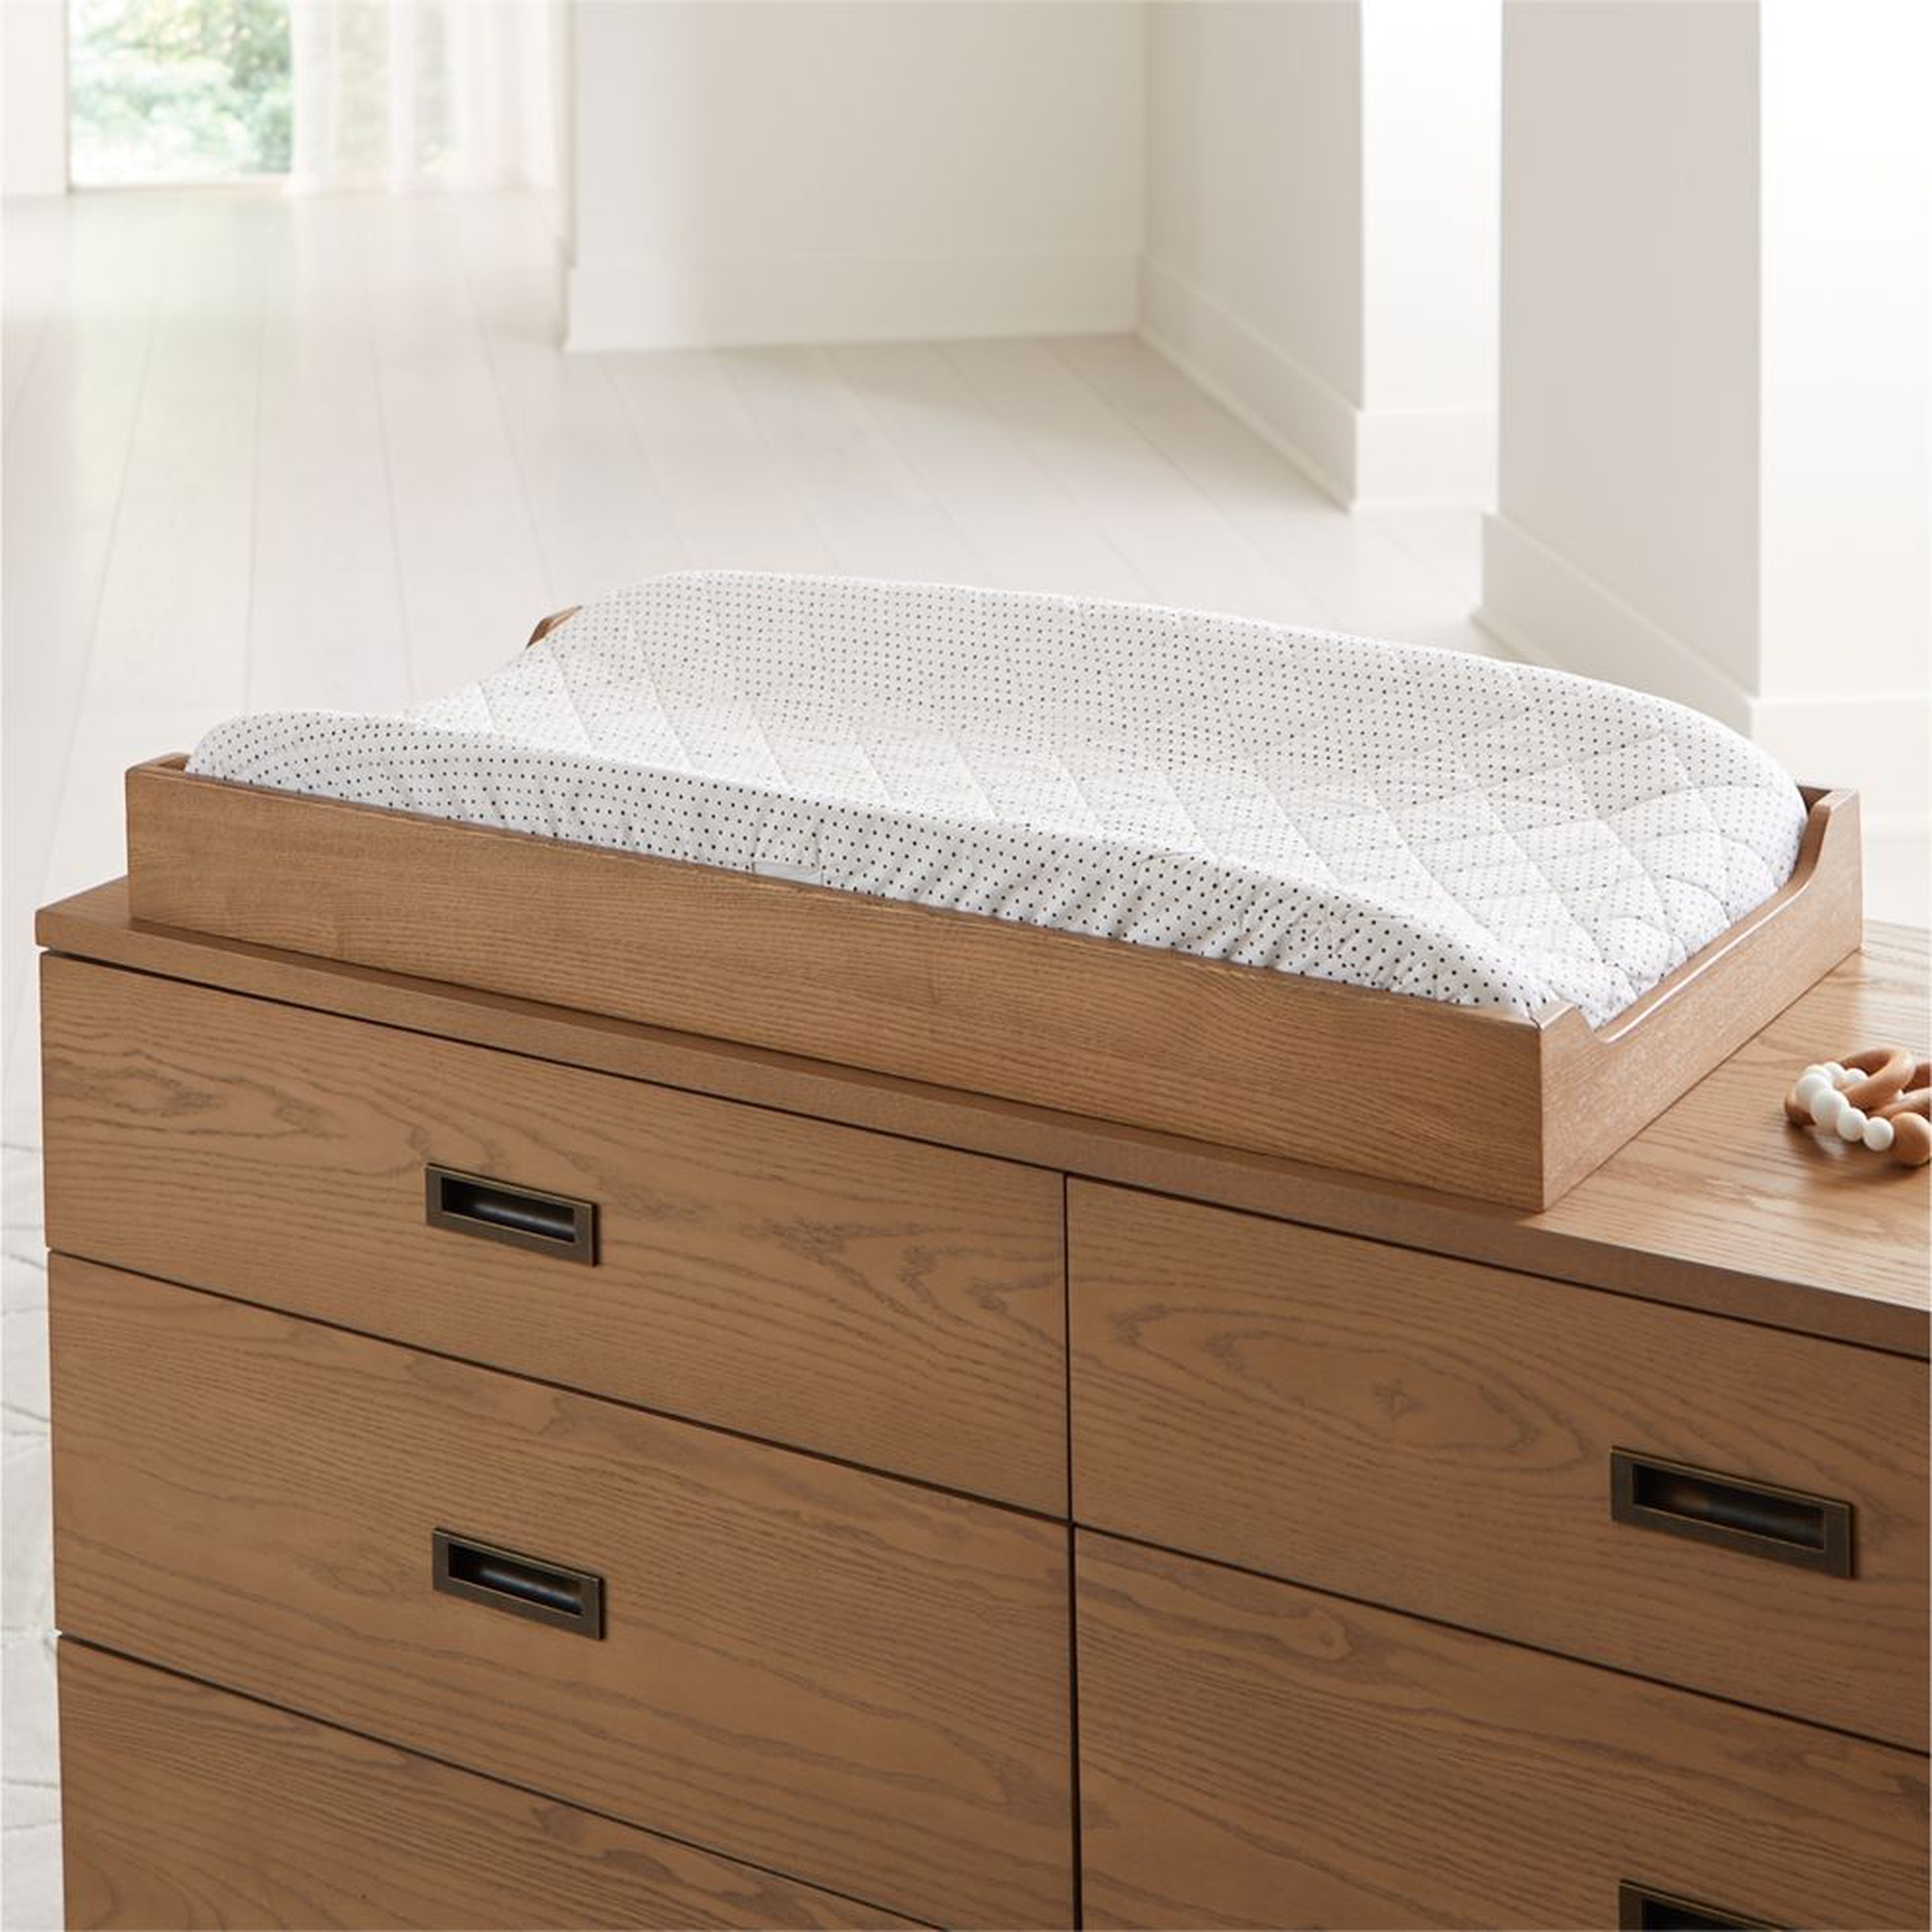 Cameron Ash Changing Table Topper - Crate and Barrel